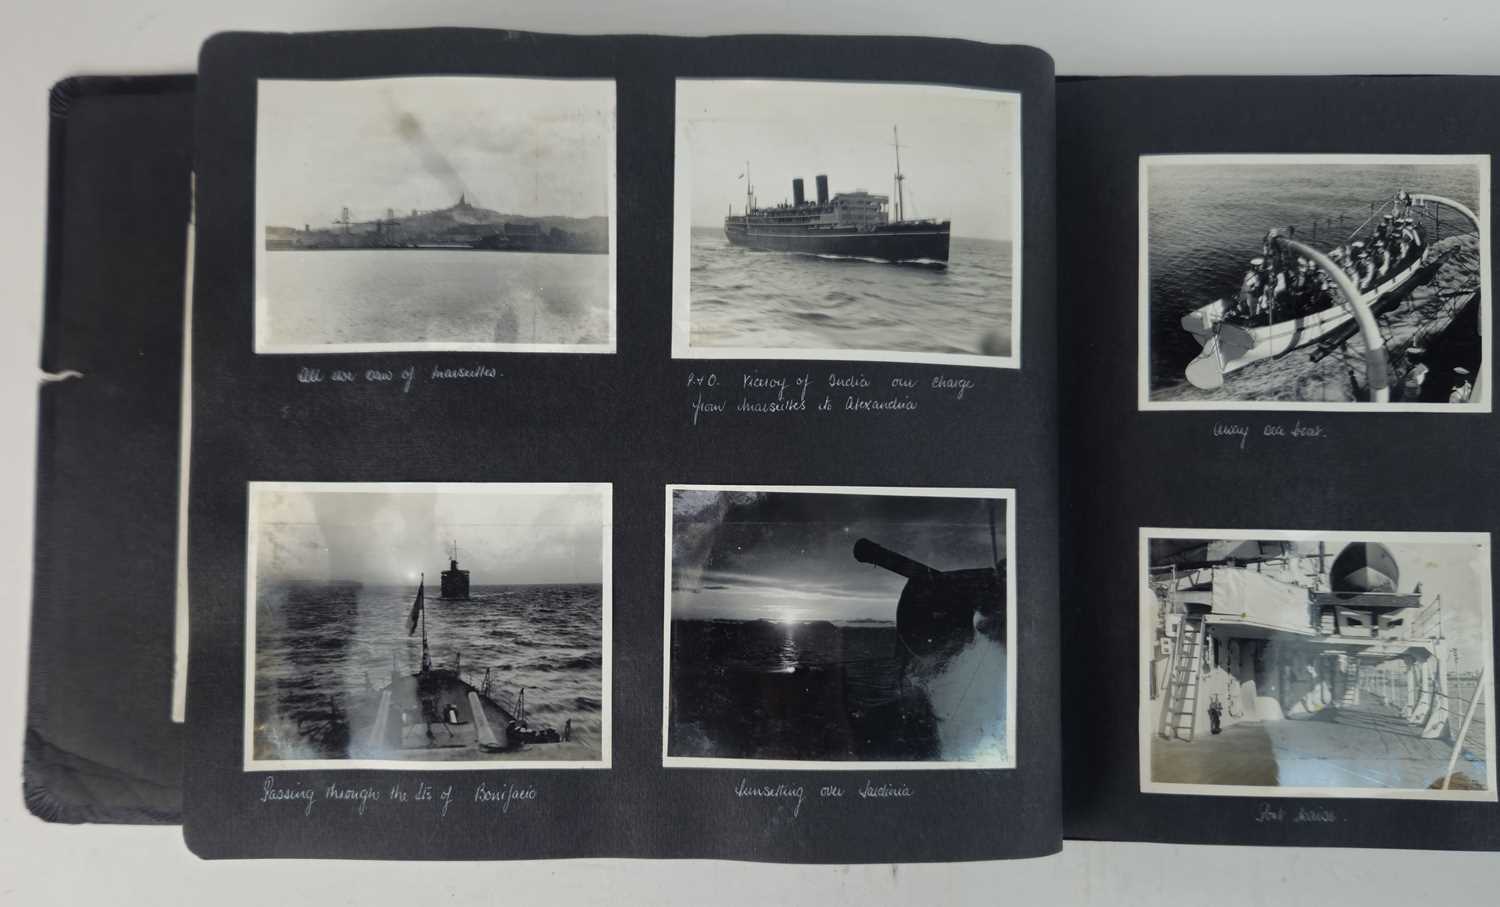 Royal Navy Photograph album of the maiden voyage of HMS Ajax (1935-1937) - Image 8 of 22